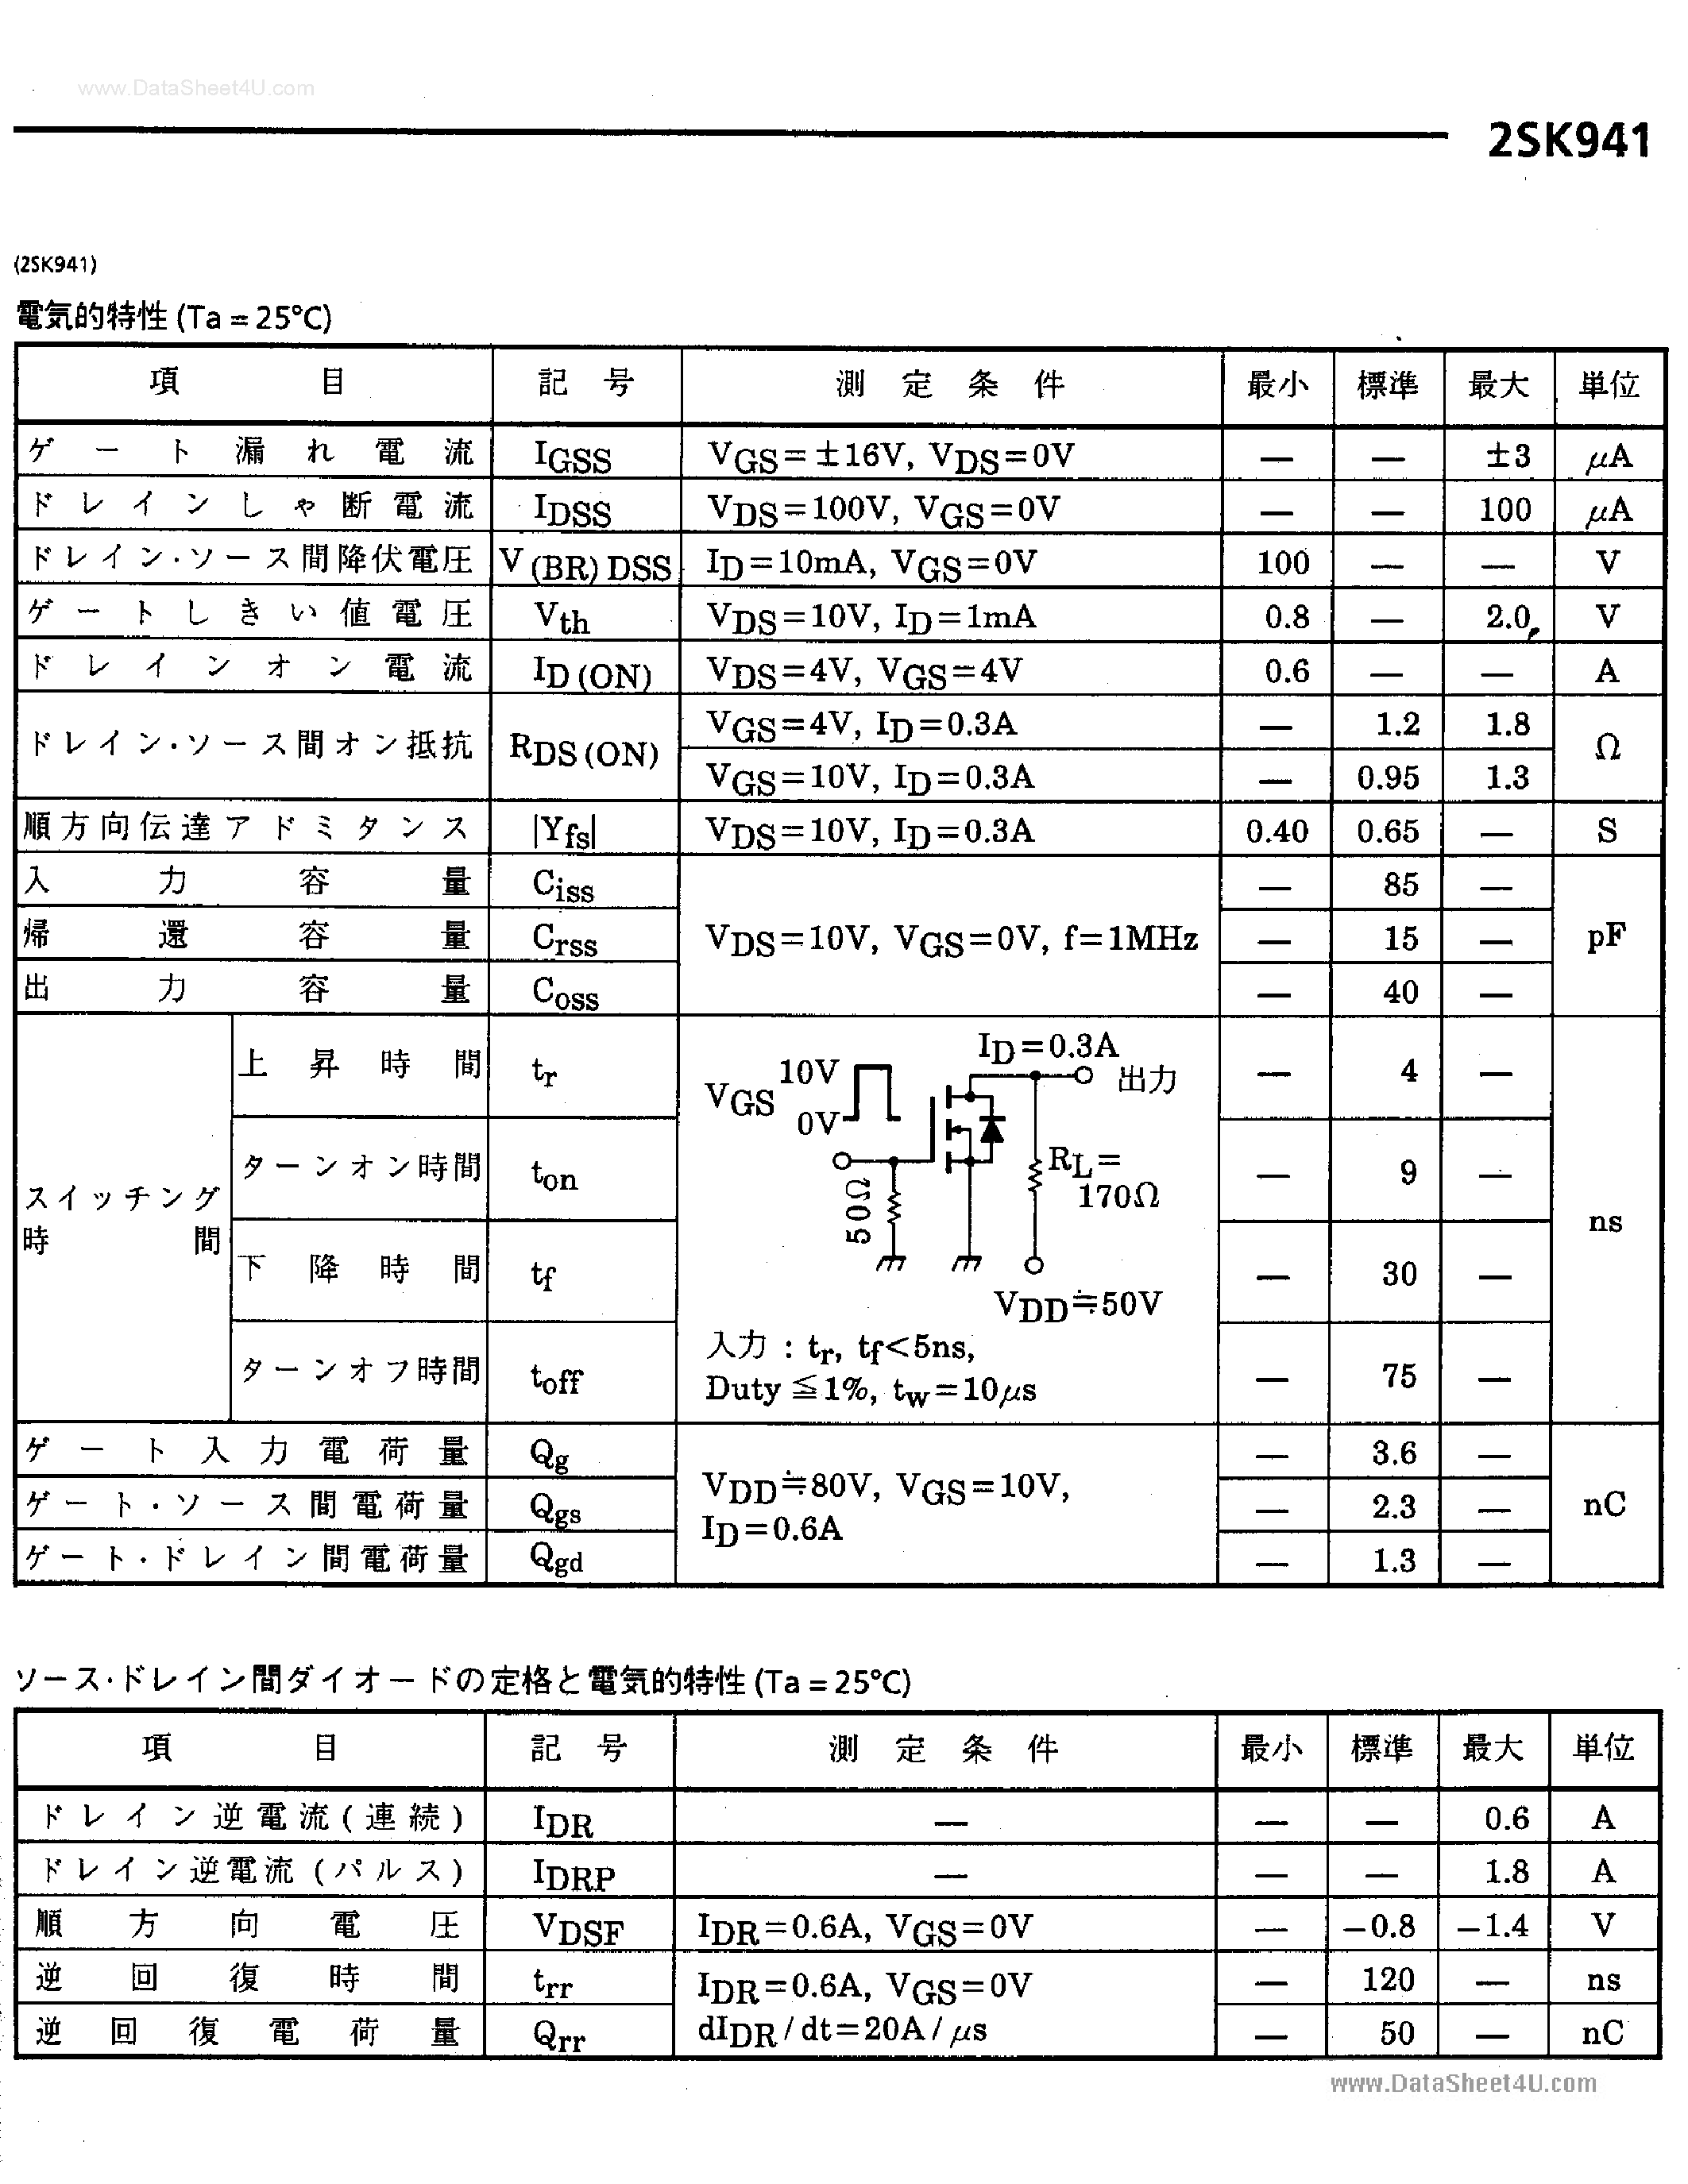 Datasheet K941 - Search -----> 2SK941 page 2